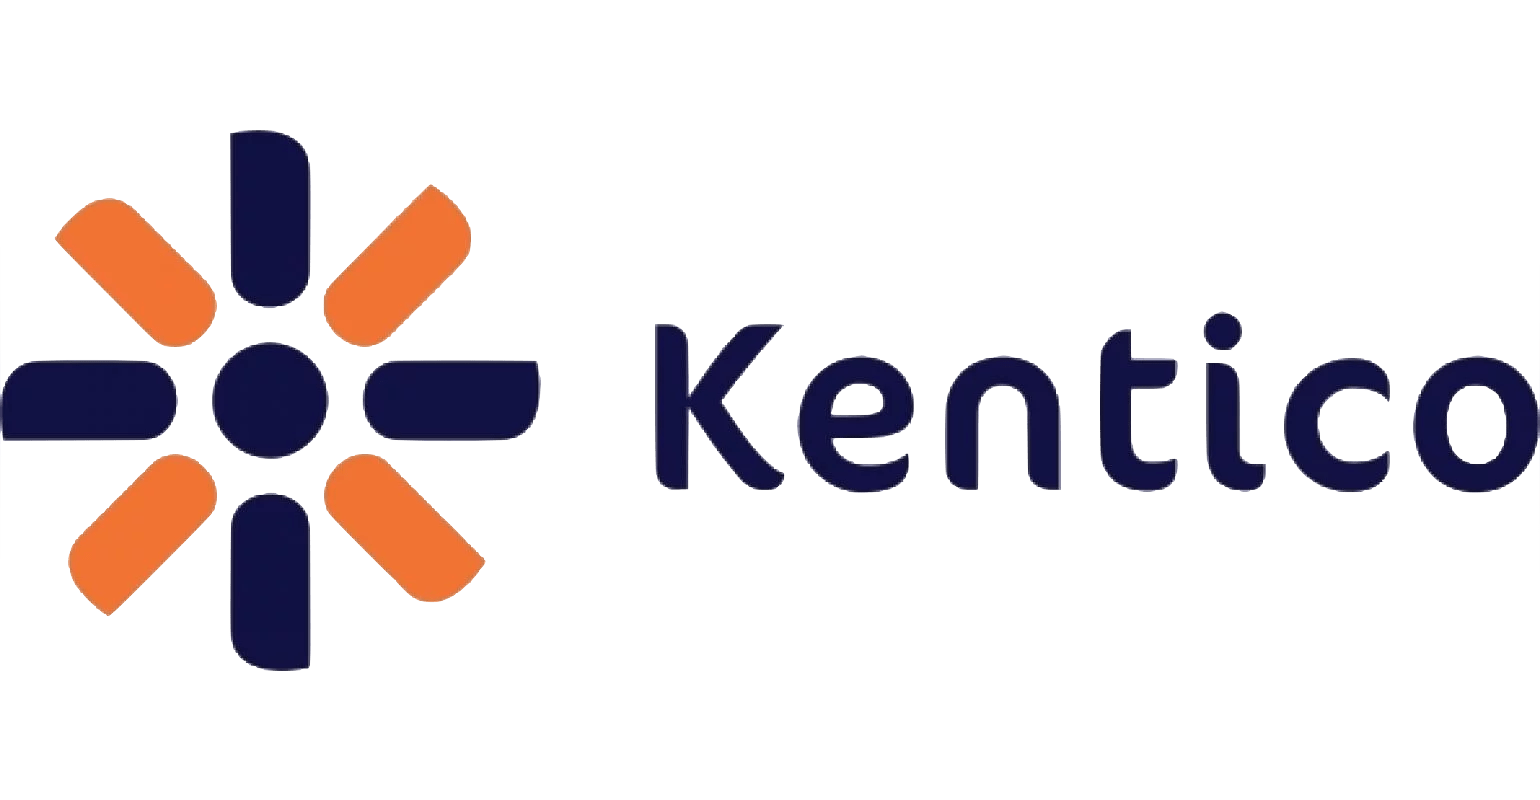 Kentico is no longer just a content management system. It is a strong vendor brand, a caring employer and a global company with two fully fledged.